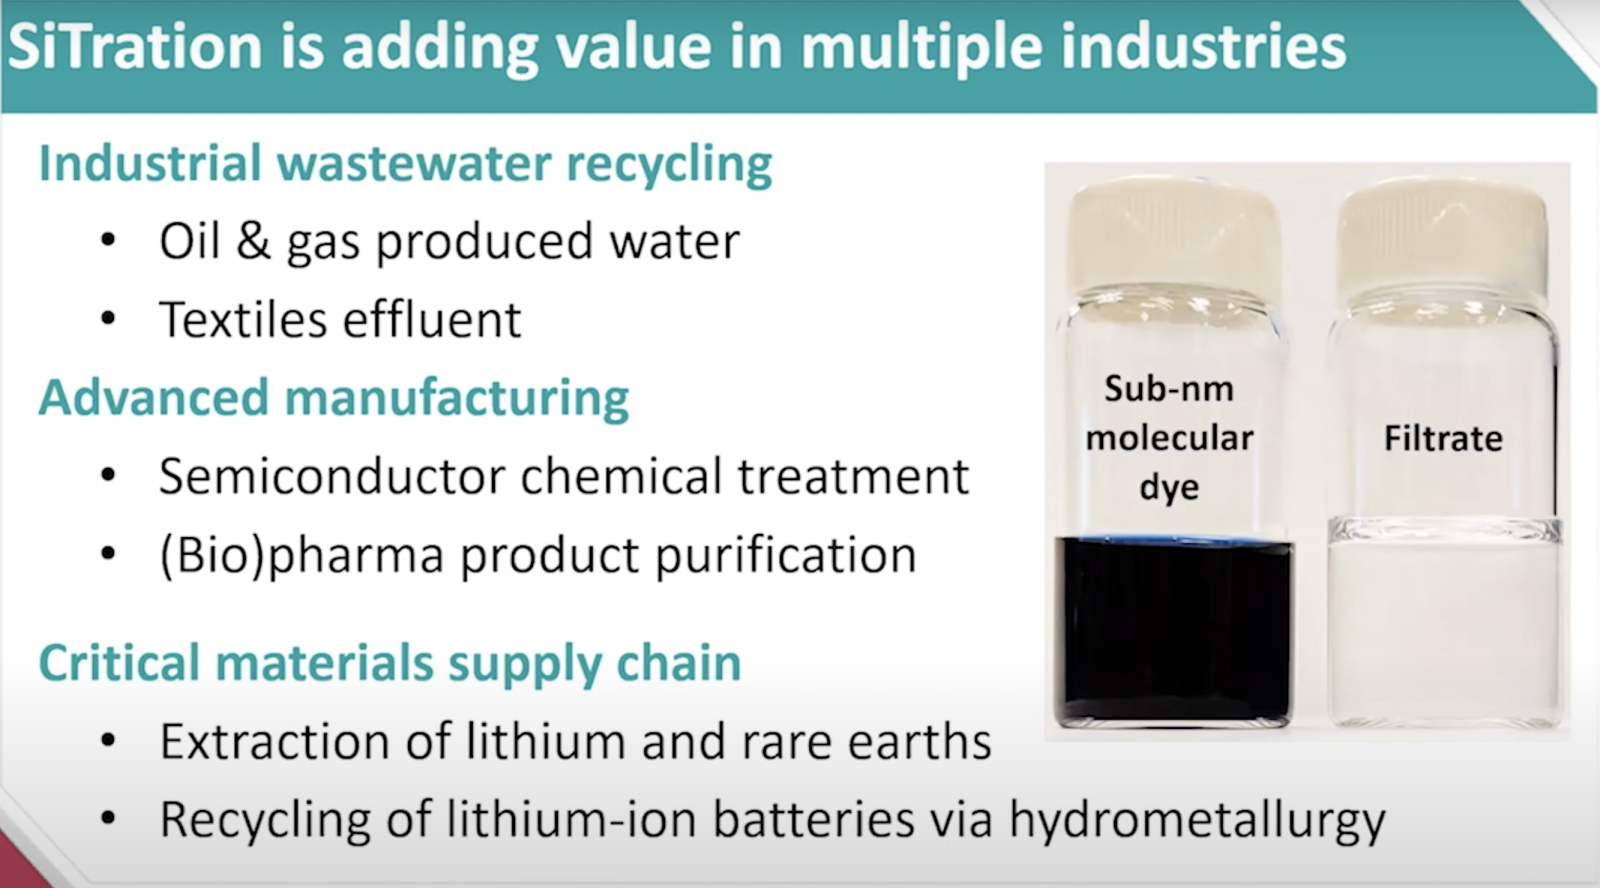 Slide that says SiTration is adding value in multiple industries: Industrial wasterwater recycling, advanced manufacturing, and critical materials supply chain